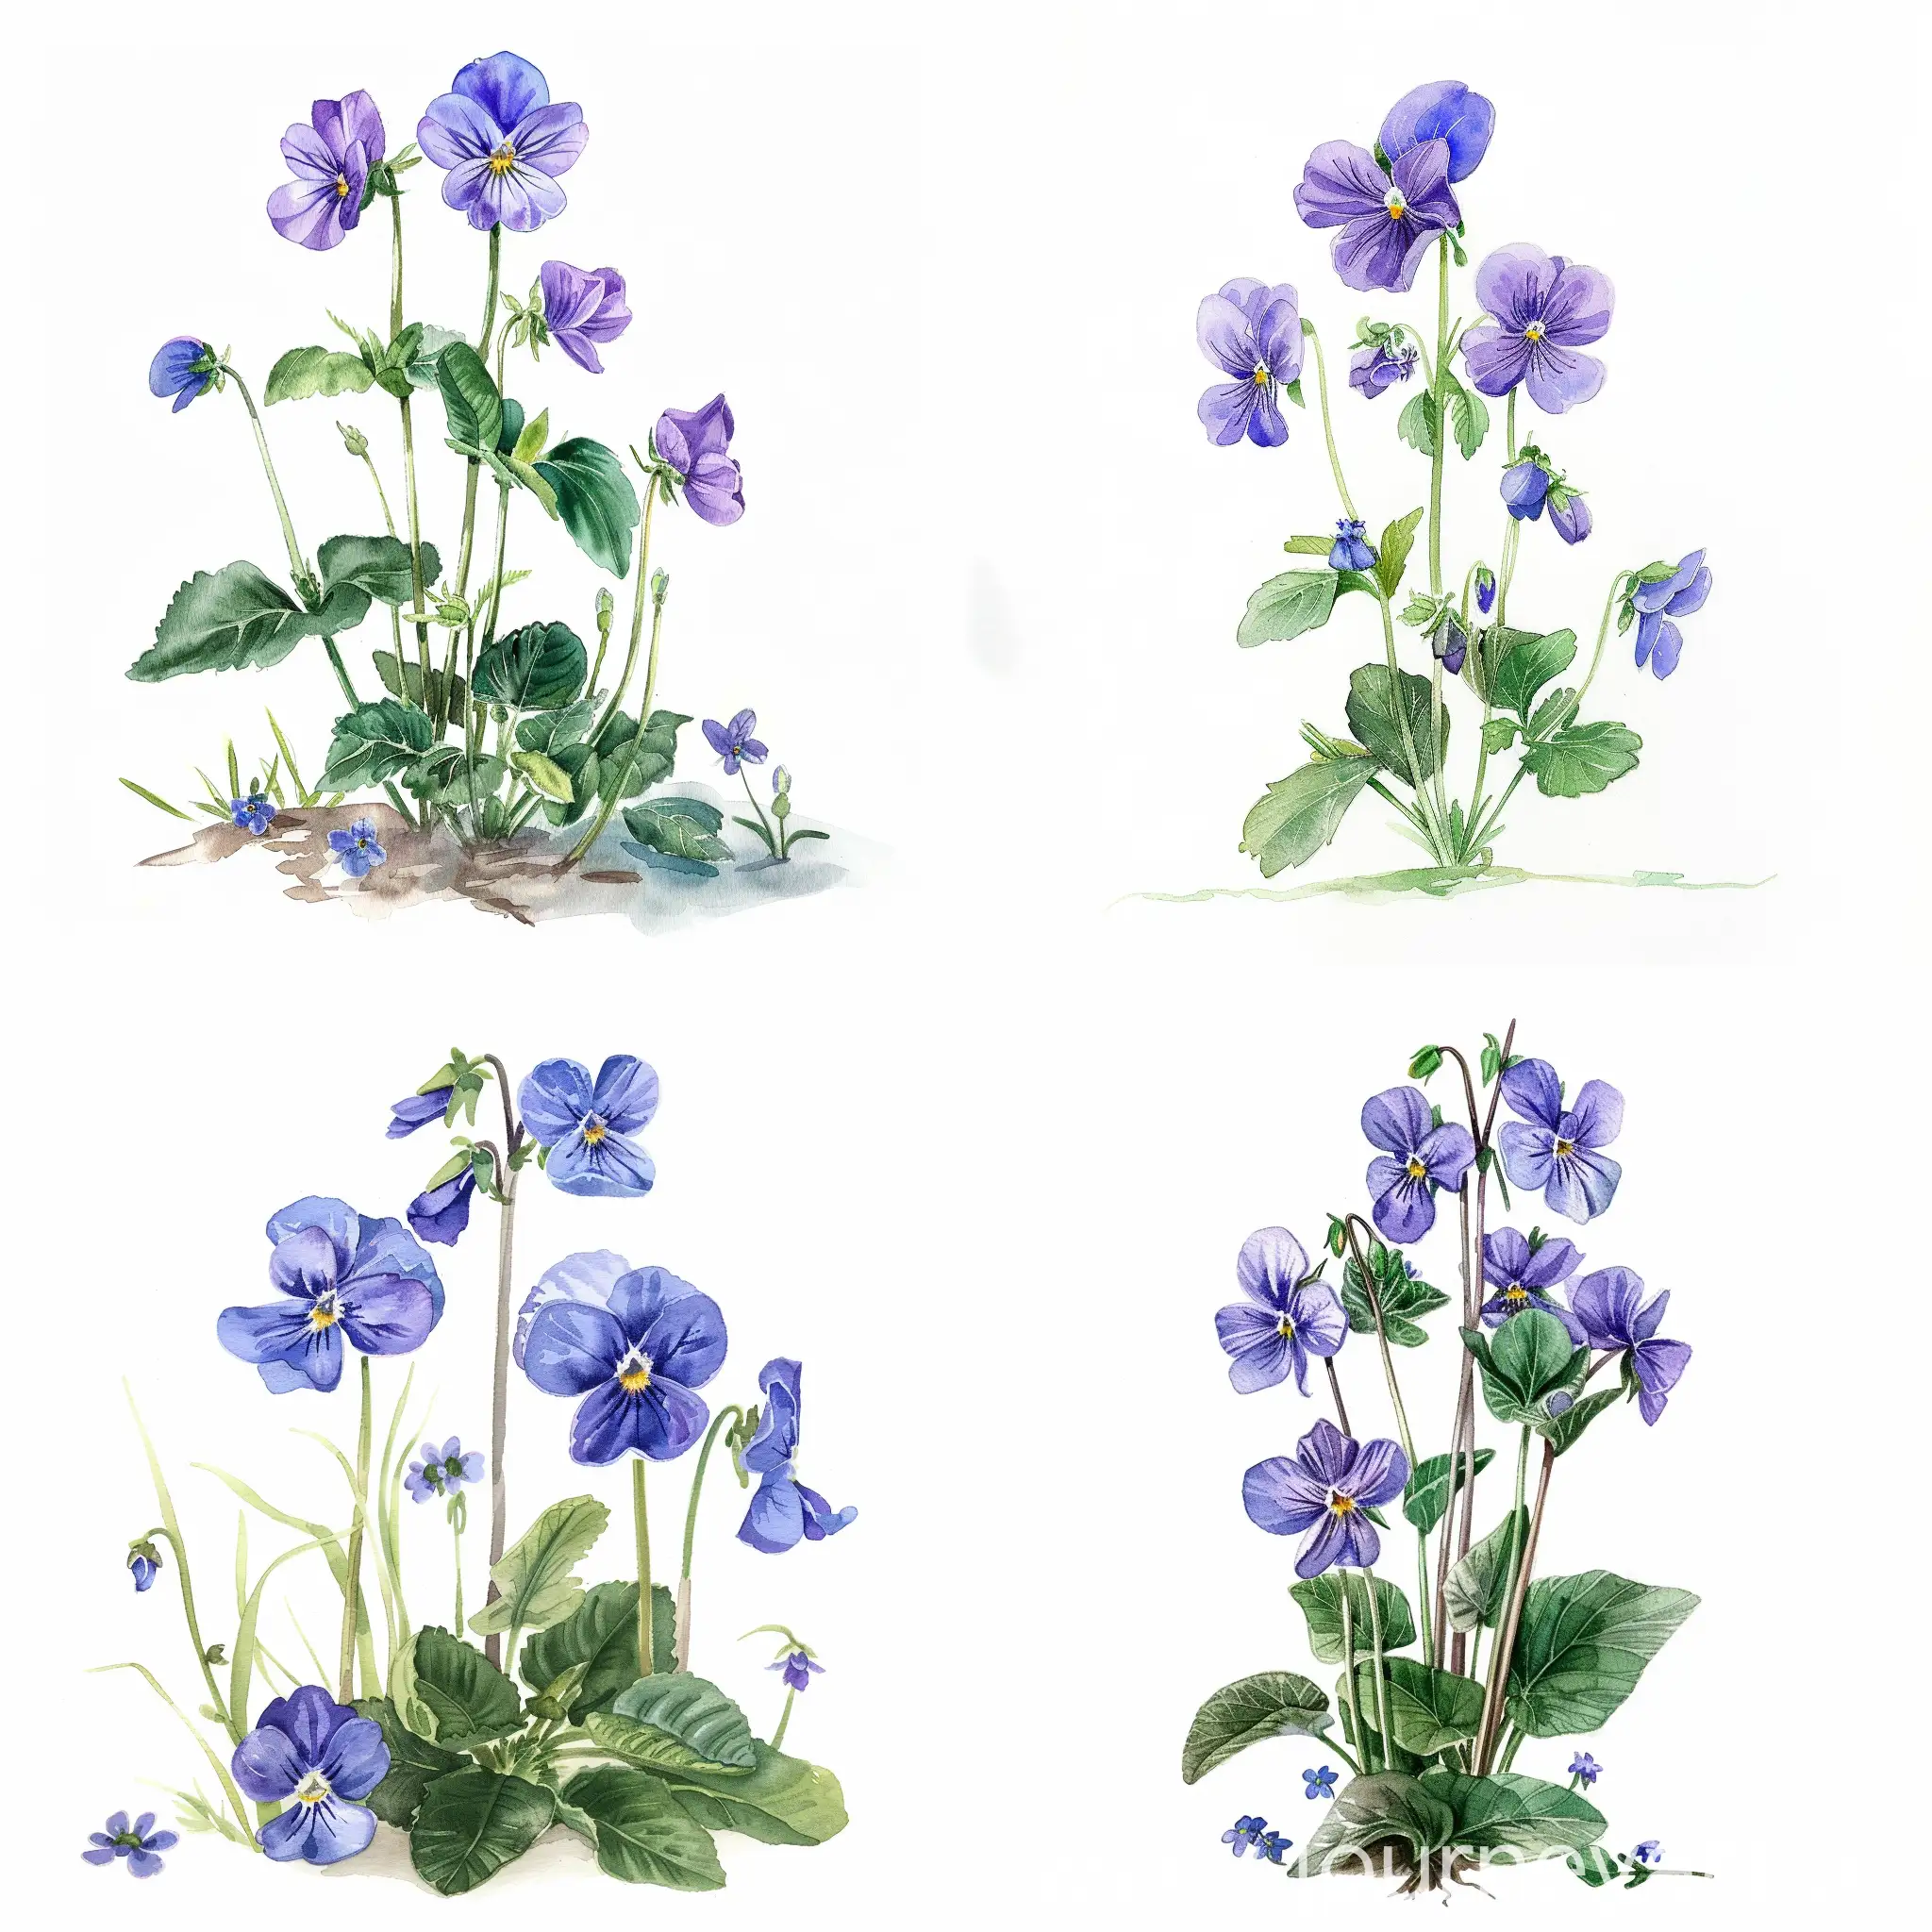 Elegant-Watercolor-Wildflower-Bouquet-with-Violets-on-White-Background